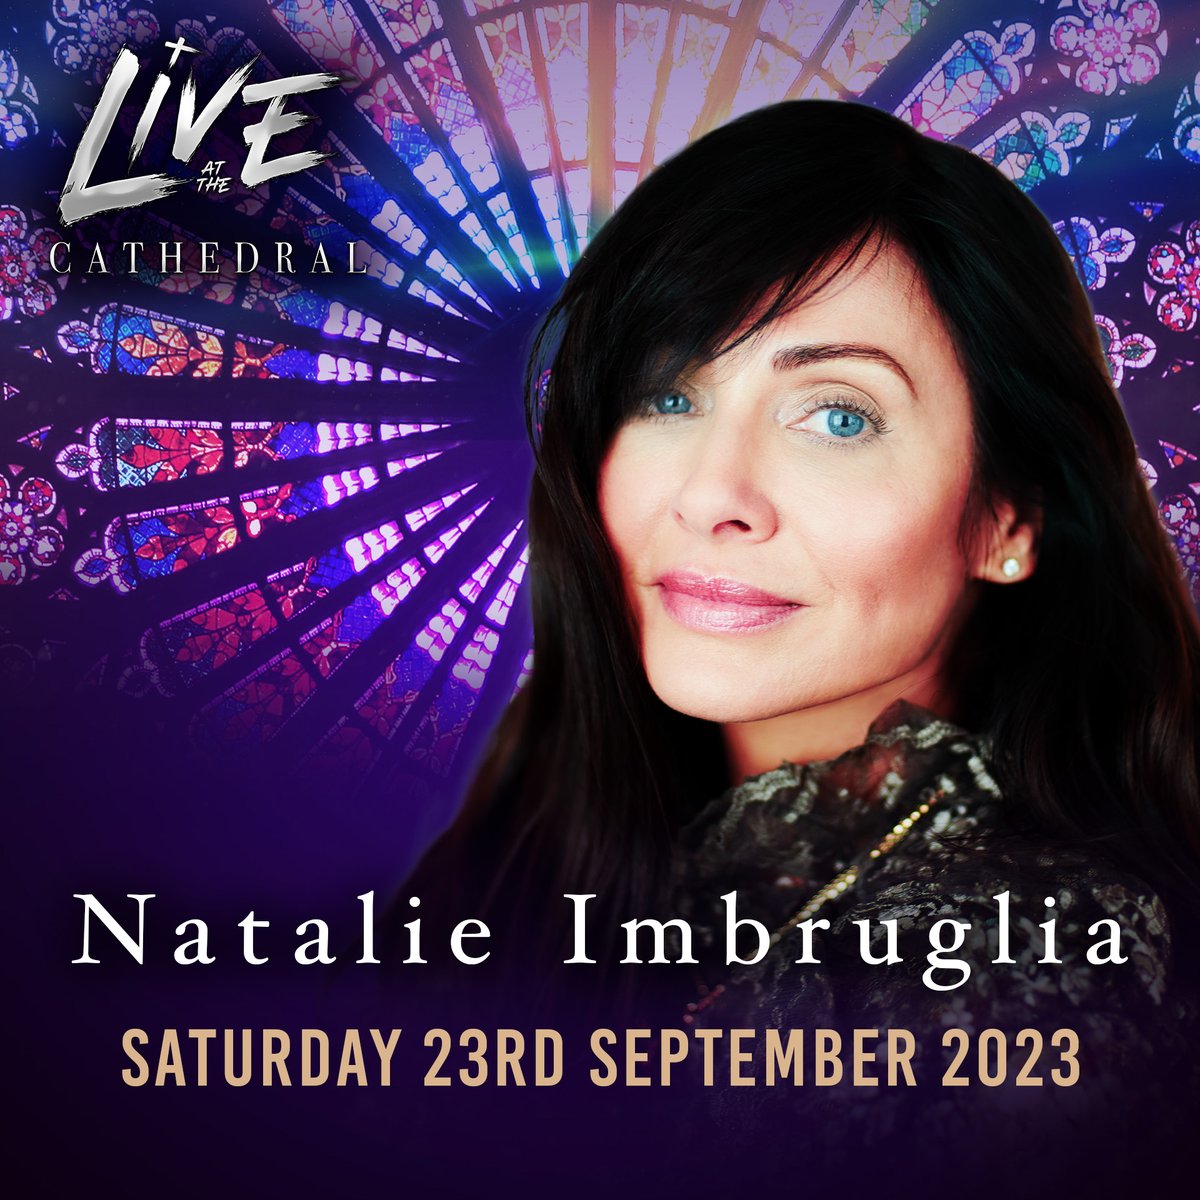 I am delighted to announce I will be performing at the stunning Durham Cathedral on Saturday 23rd September 2023 as part of their Live at the Cathedral series. @LATC_UK Tickets on sale now! 🎤🎼 💜 #LATC23 #LIVEATTHECATHEDRAL23 #LATCDURHAM ticketline.co.uk/order/tickets/…